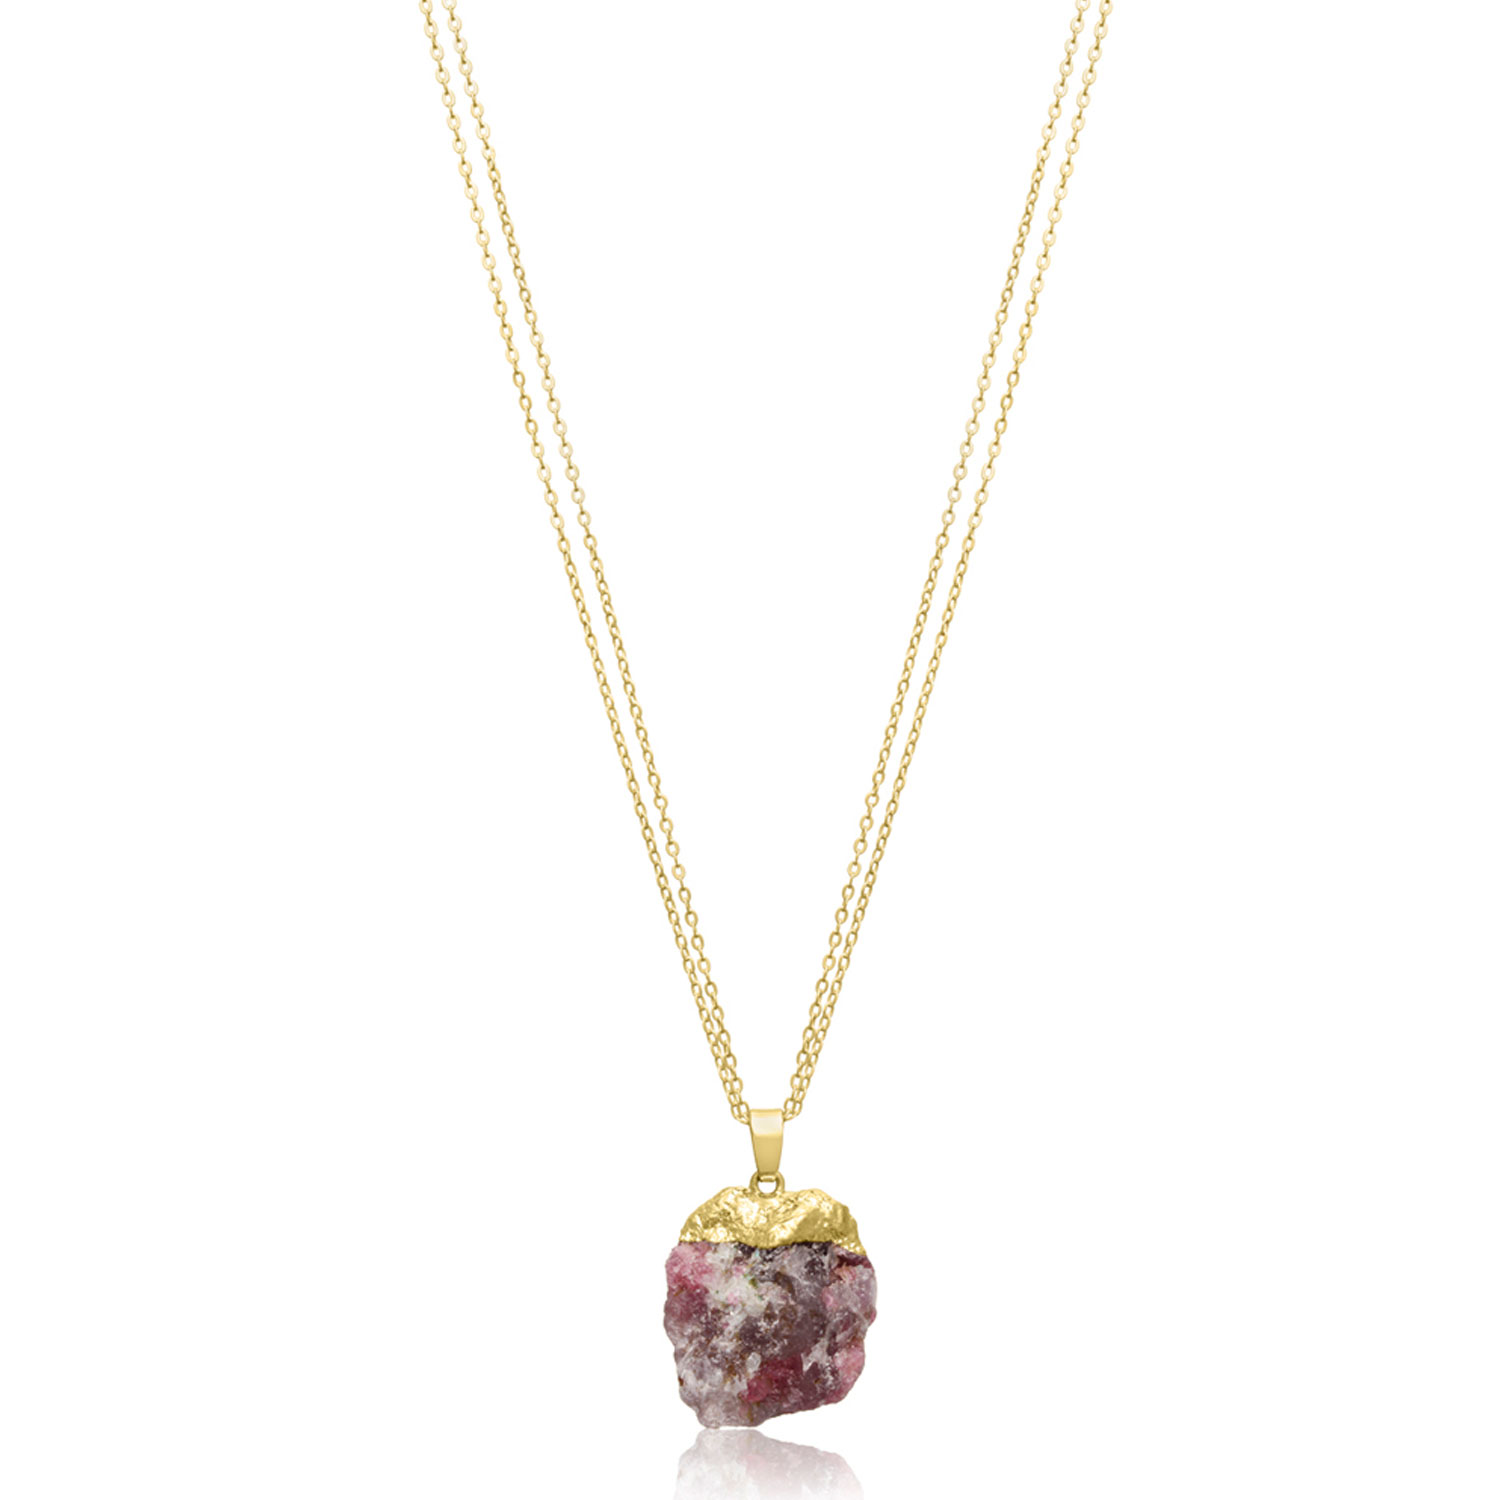 30 Carat Natural Multicolored Agate Necklace In 18 Karat Gold Overlay, 30 Inches